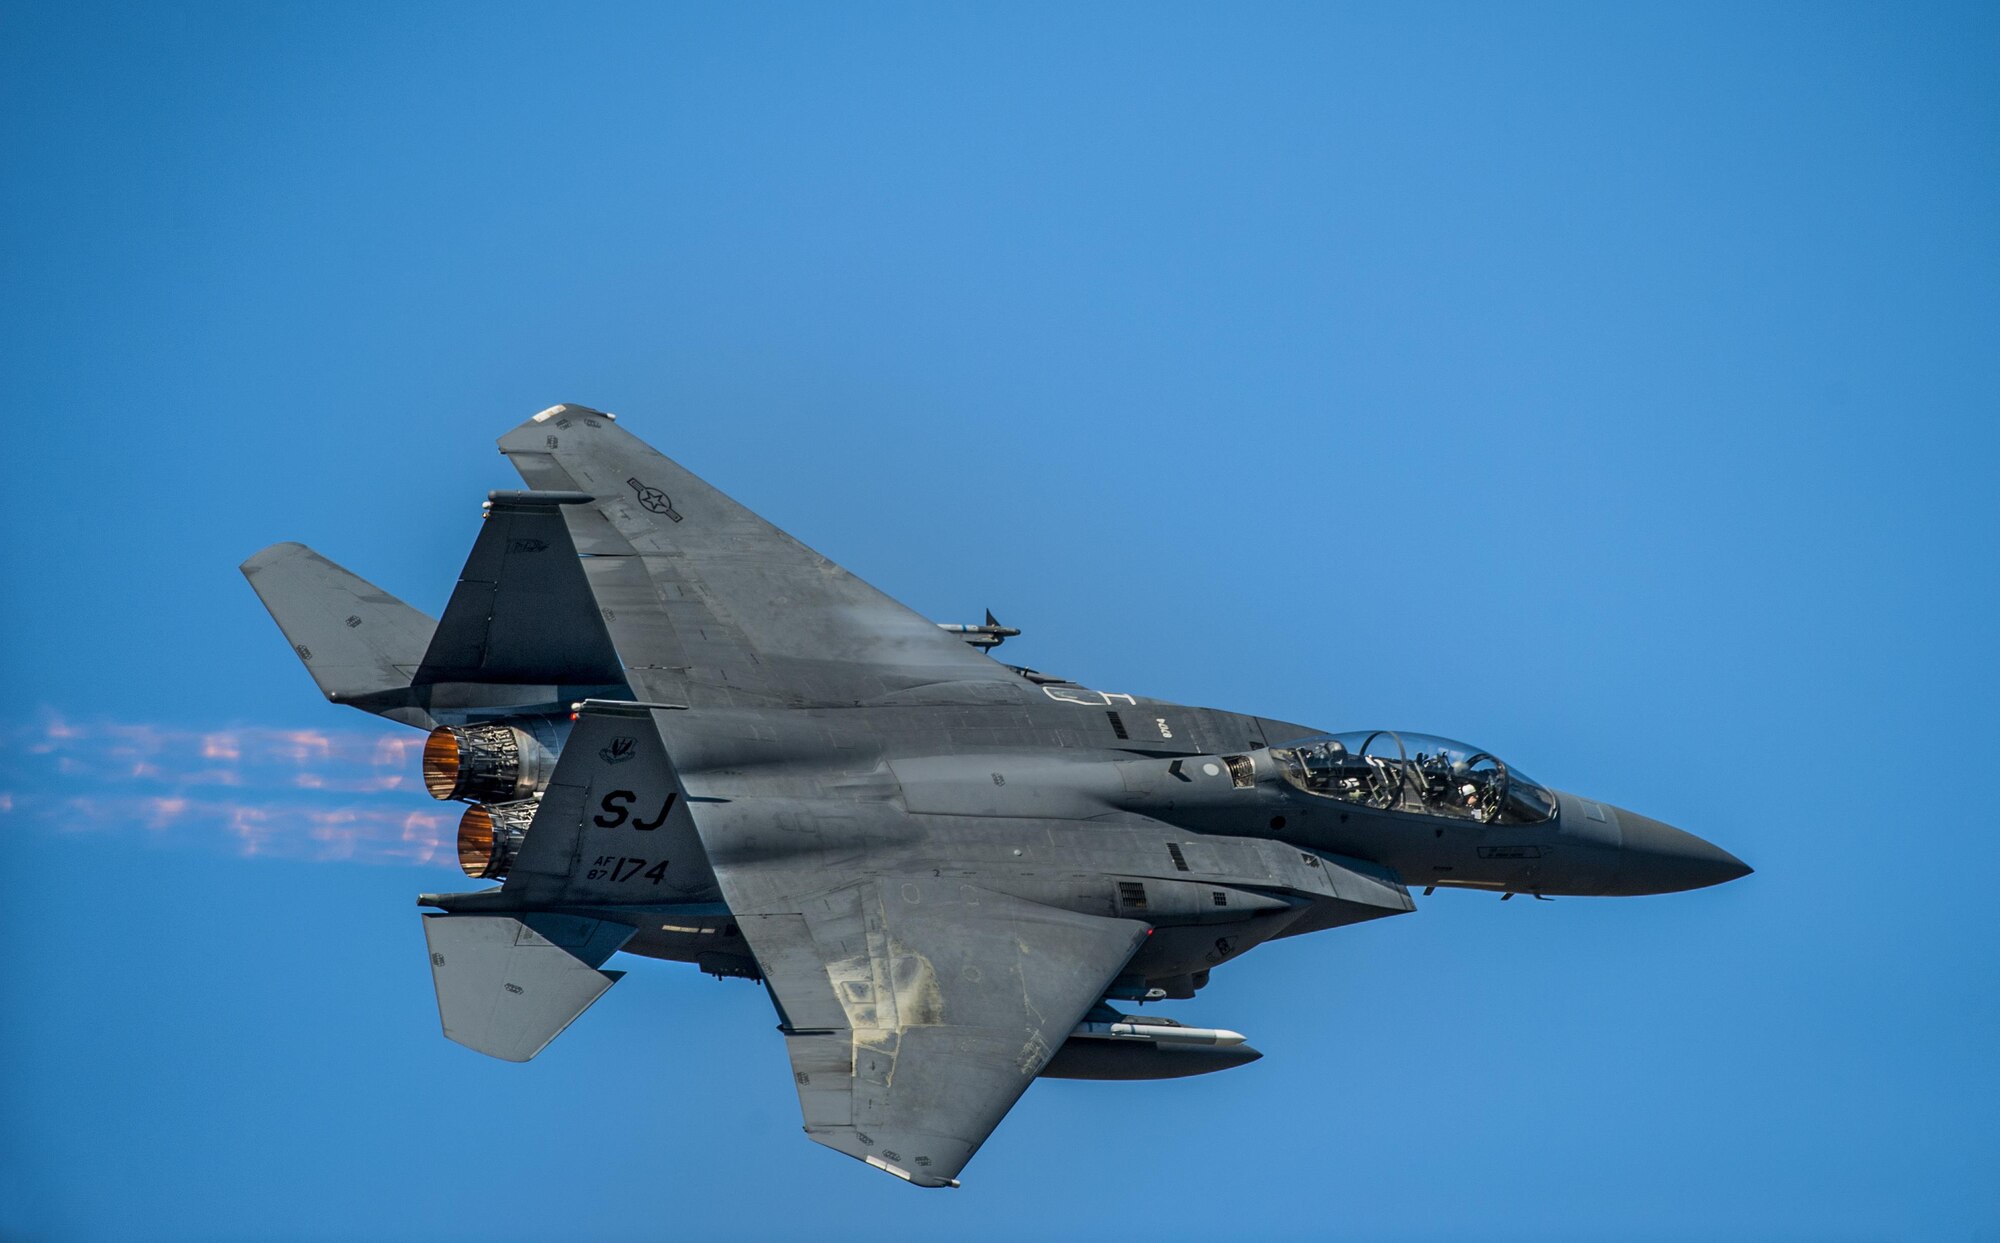 An F-15E Strike Eagle soars through the sky during a training exercise, Feb. 18, 2016, at Moody Air Force Base, Ga. During the training, the aircraft conducted tactical air and ground maneuvers, as well as weapons training. (U.S. Air Force photo by Airman 1st Class Lauren M. Johnson/Released)